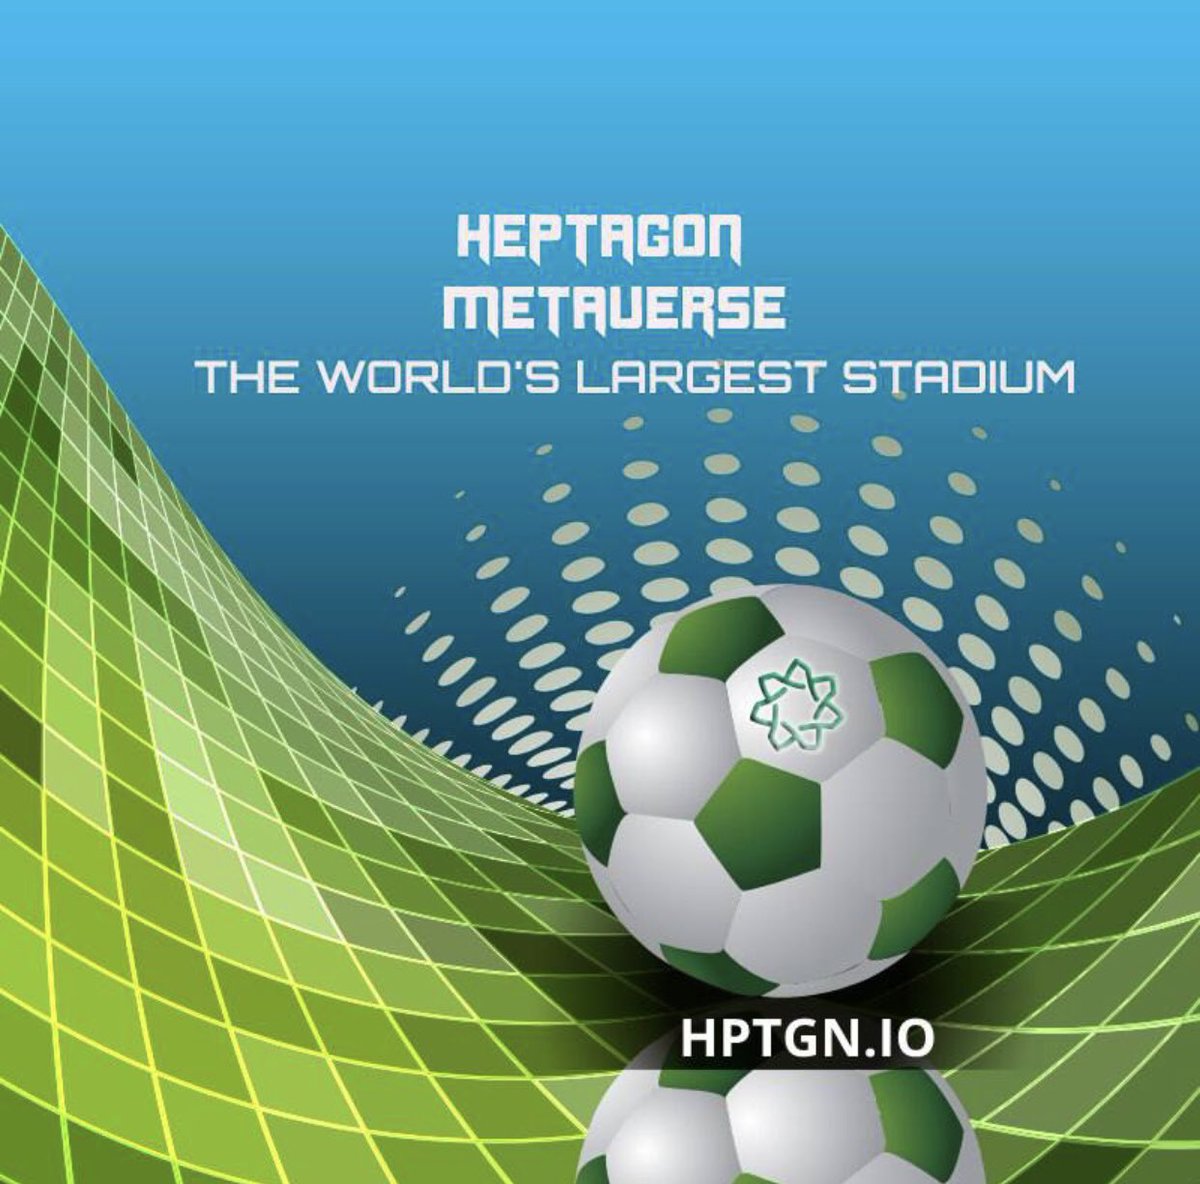 You are the mannager here! hptgn.io Register and Earn #Hepta ✅ Watching Matches 📽️ ☑️ Play Football ⚽ ✔️ Bowling 🎳 ✅ Table Tennis 🎾 ☑️ Ice Hockey 🏑 ✔️ #NFT Market The world's largest #Stadium #metaverse #coin #crypto #vr #vrsport #VRChat #META #NFTProject